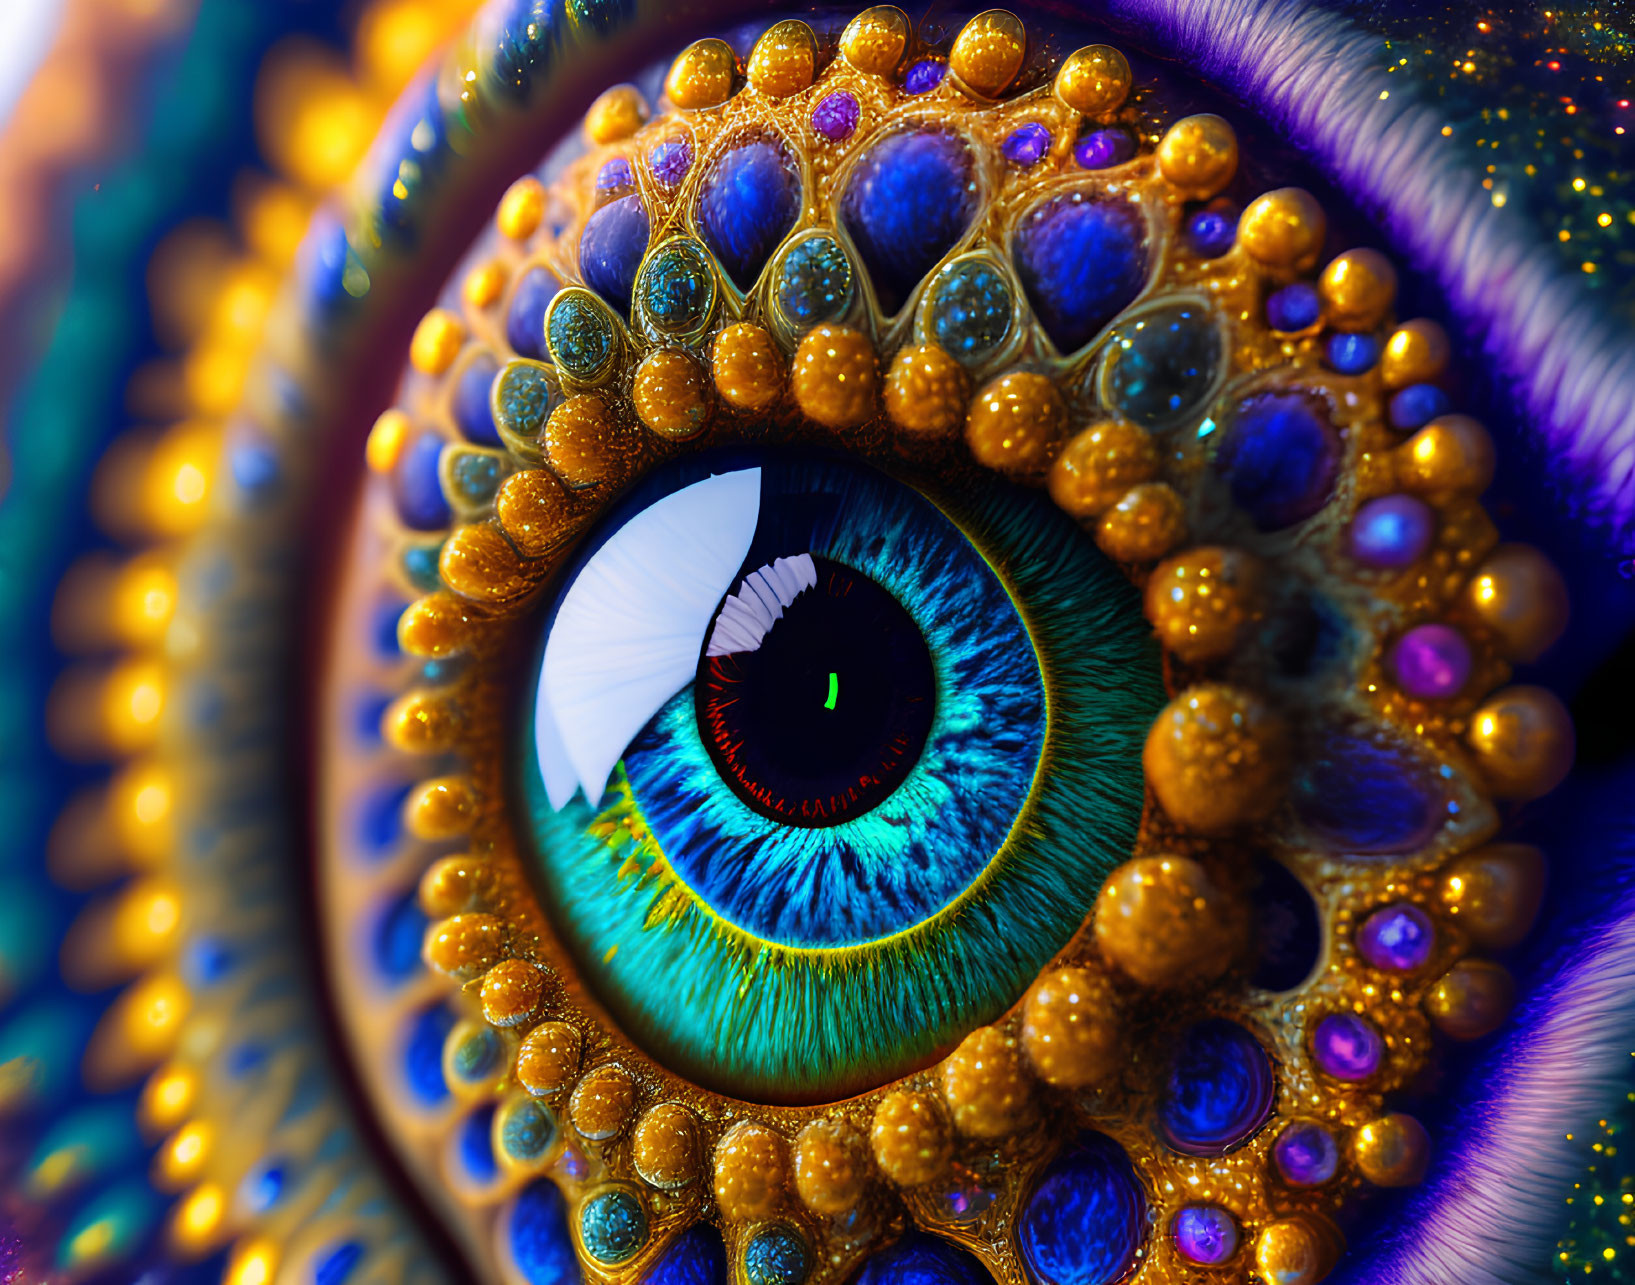 Close-up of vibrant blue eye with golden orbs in colorful ambiance